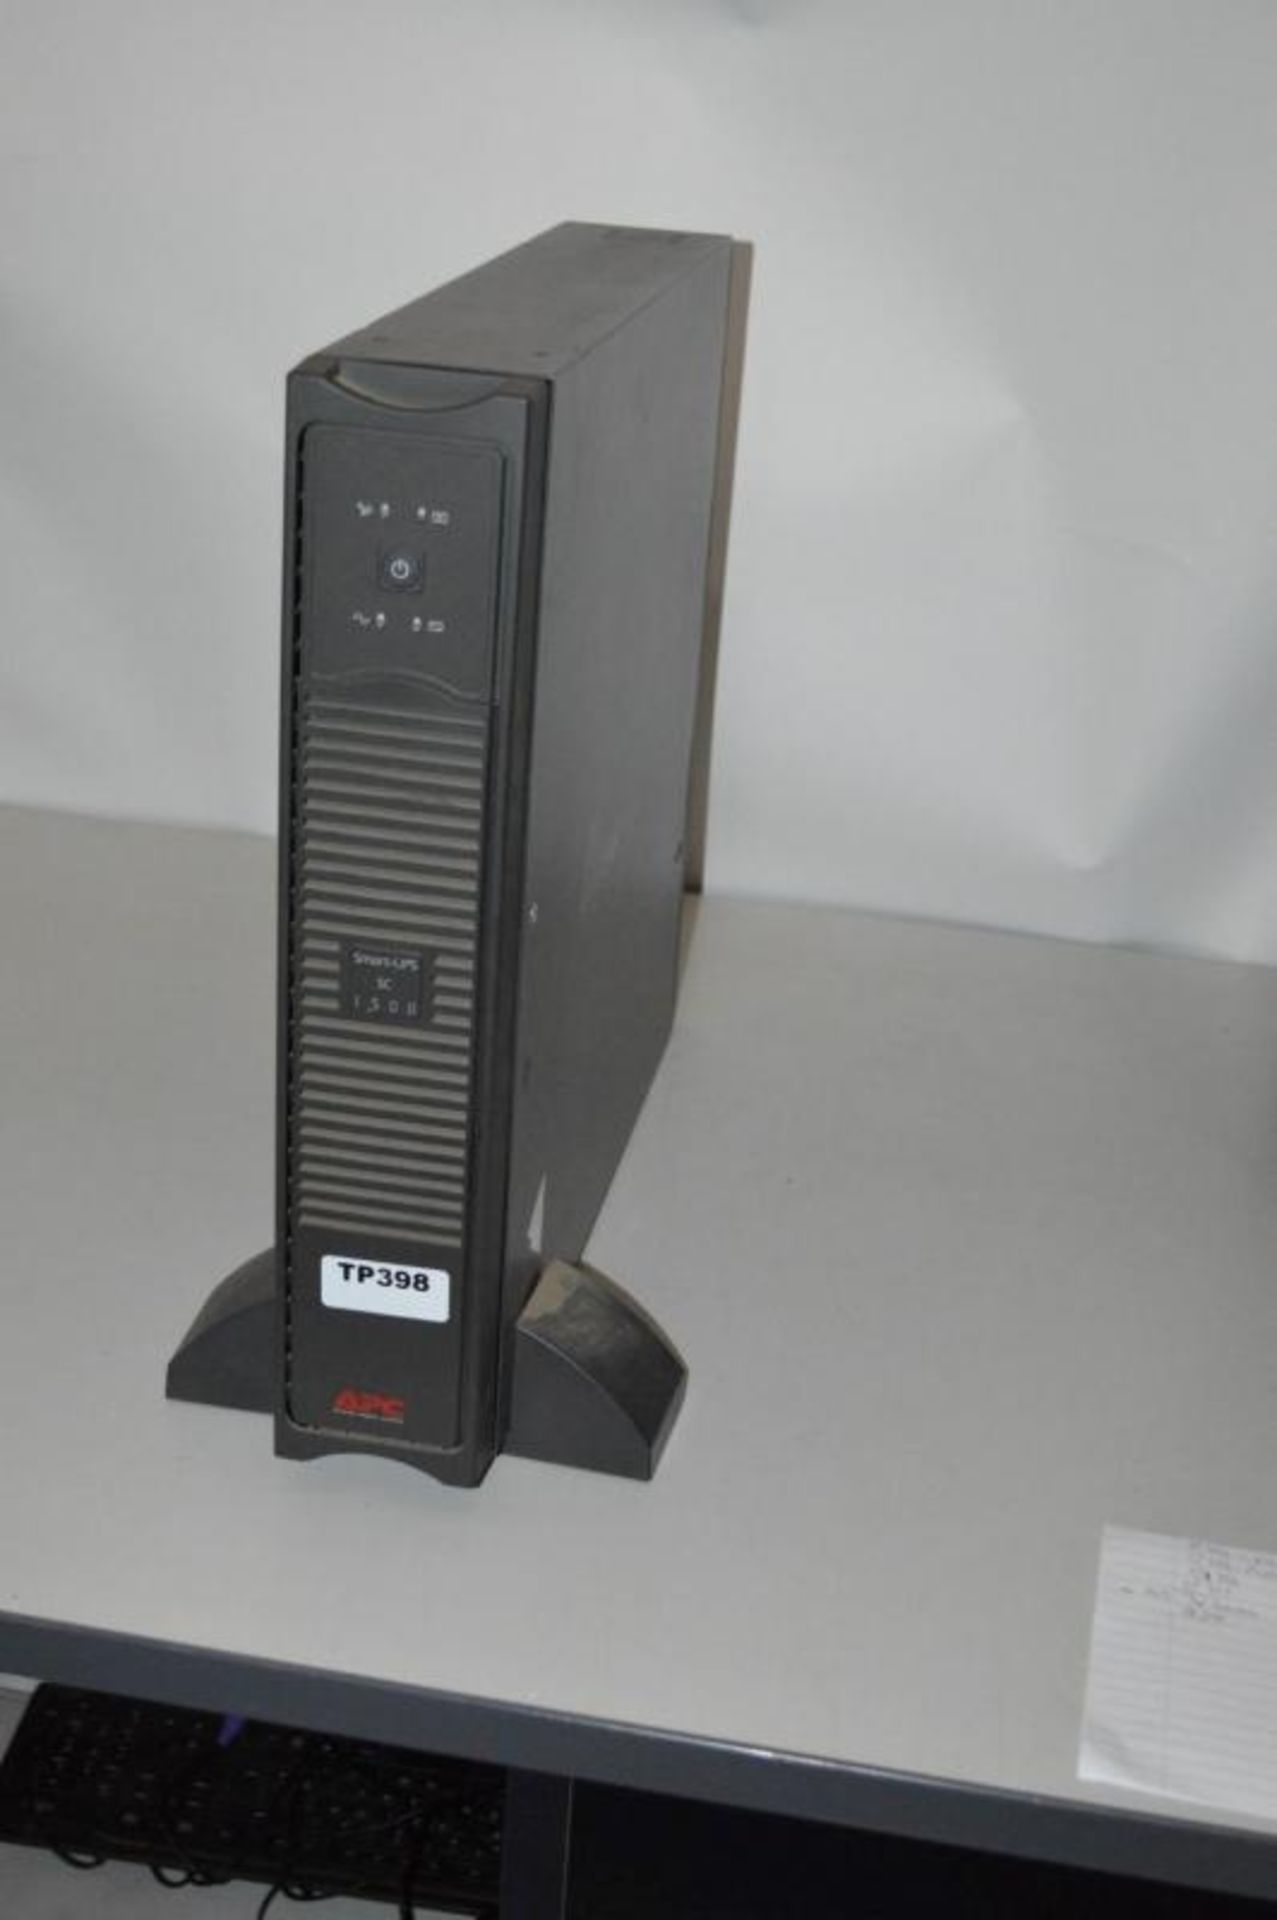 1 x APC Smart-UPS (1500 VA) Line Interactive (Come Out Of A Working Office Enviroment) - Ref TP398 - - Image 6 of 6